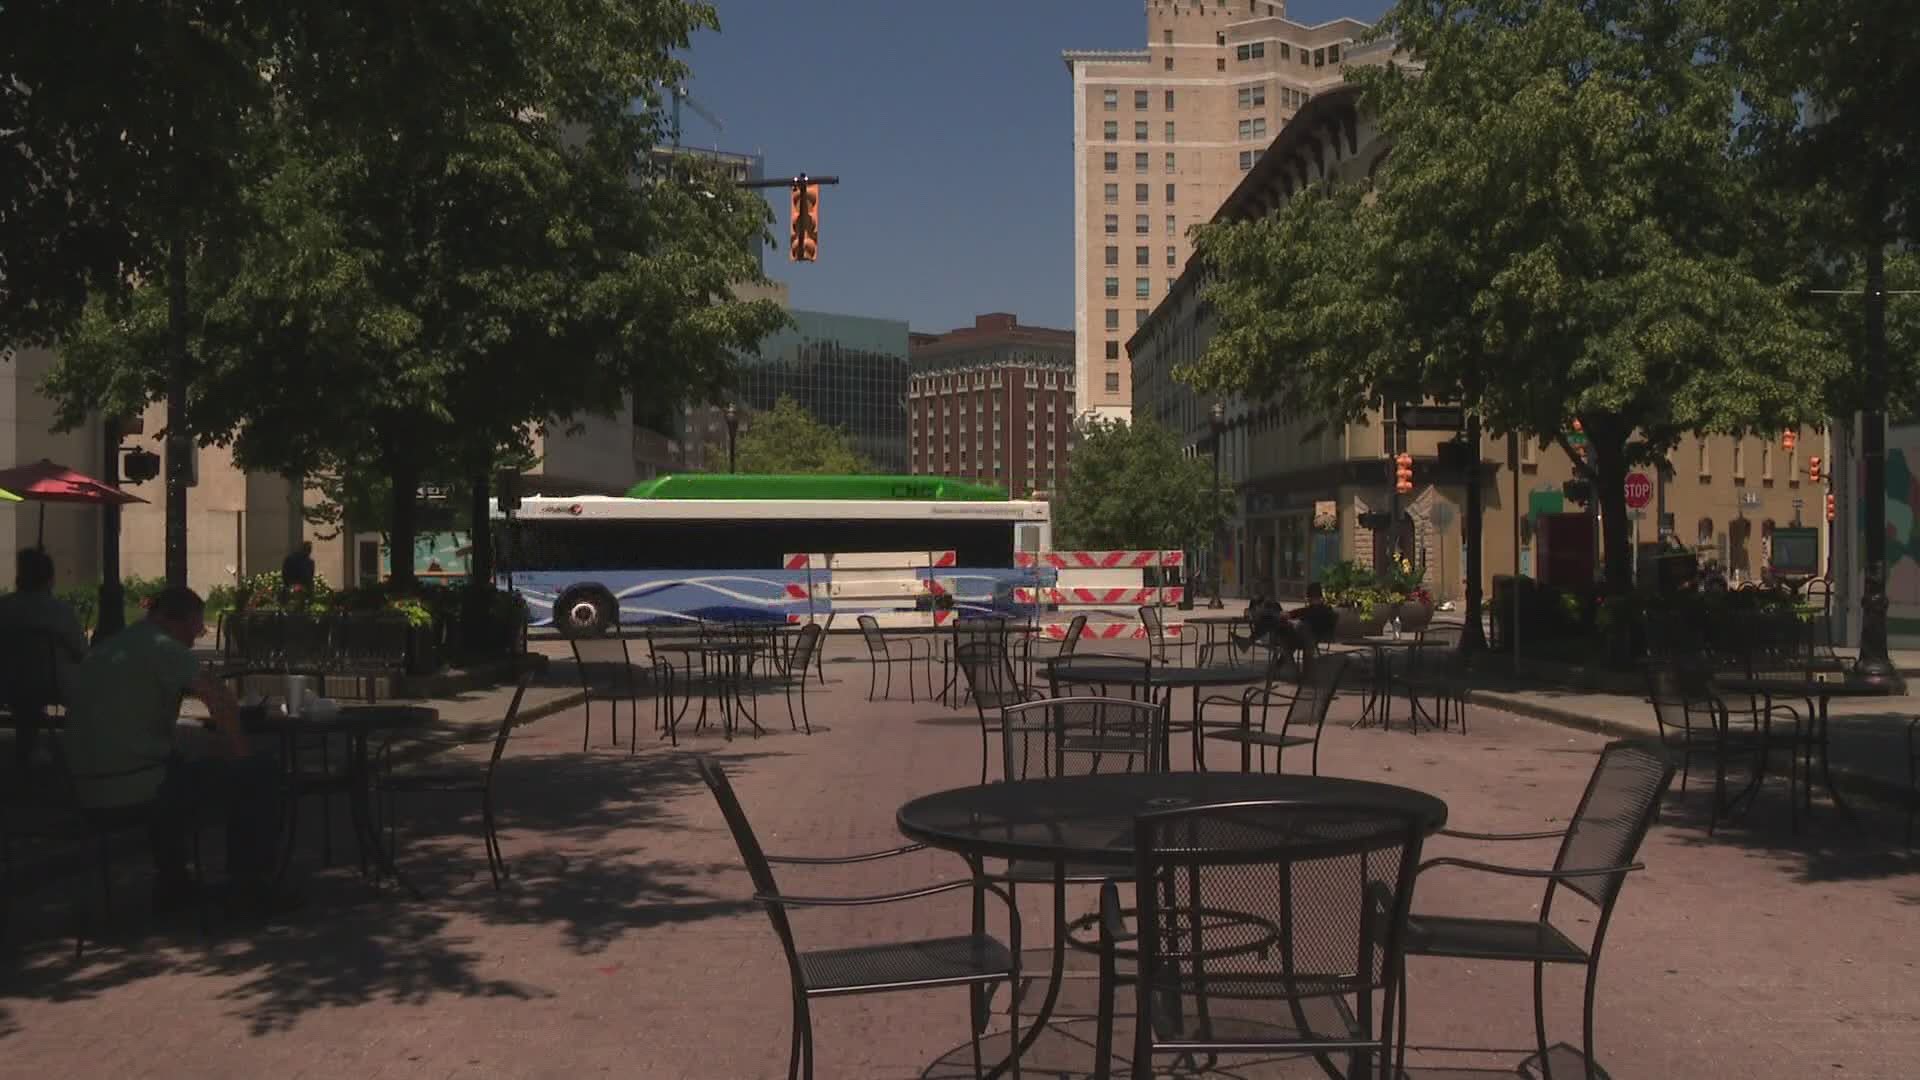 Grand Rapids' social zone project is completely funded by Downtown Grand Rapids, Inc. and any local businesses can use the areas -- free of charge.